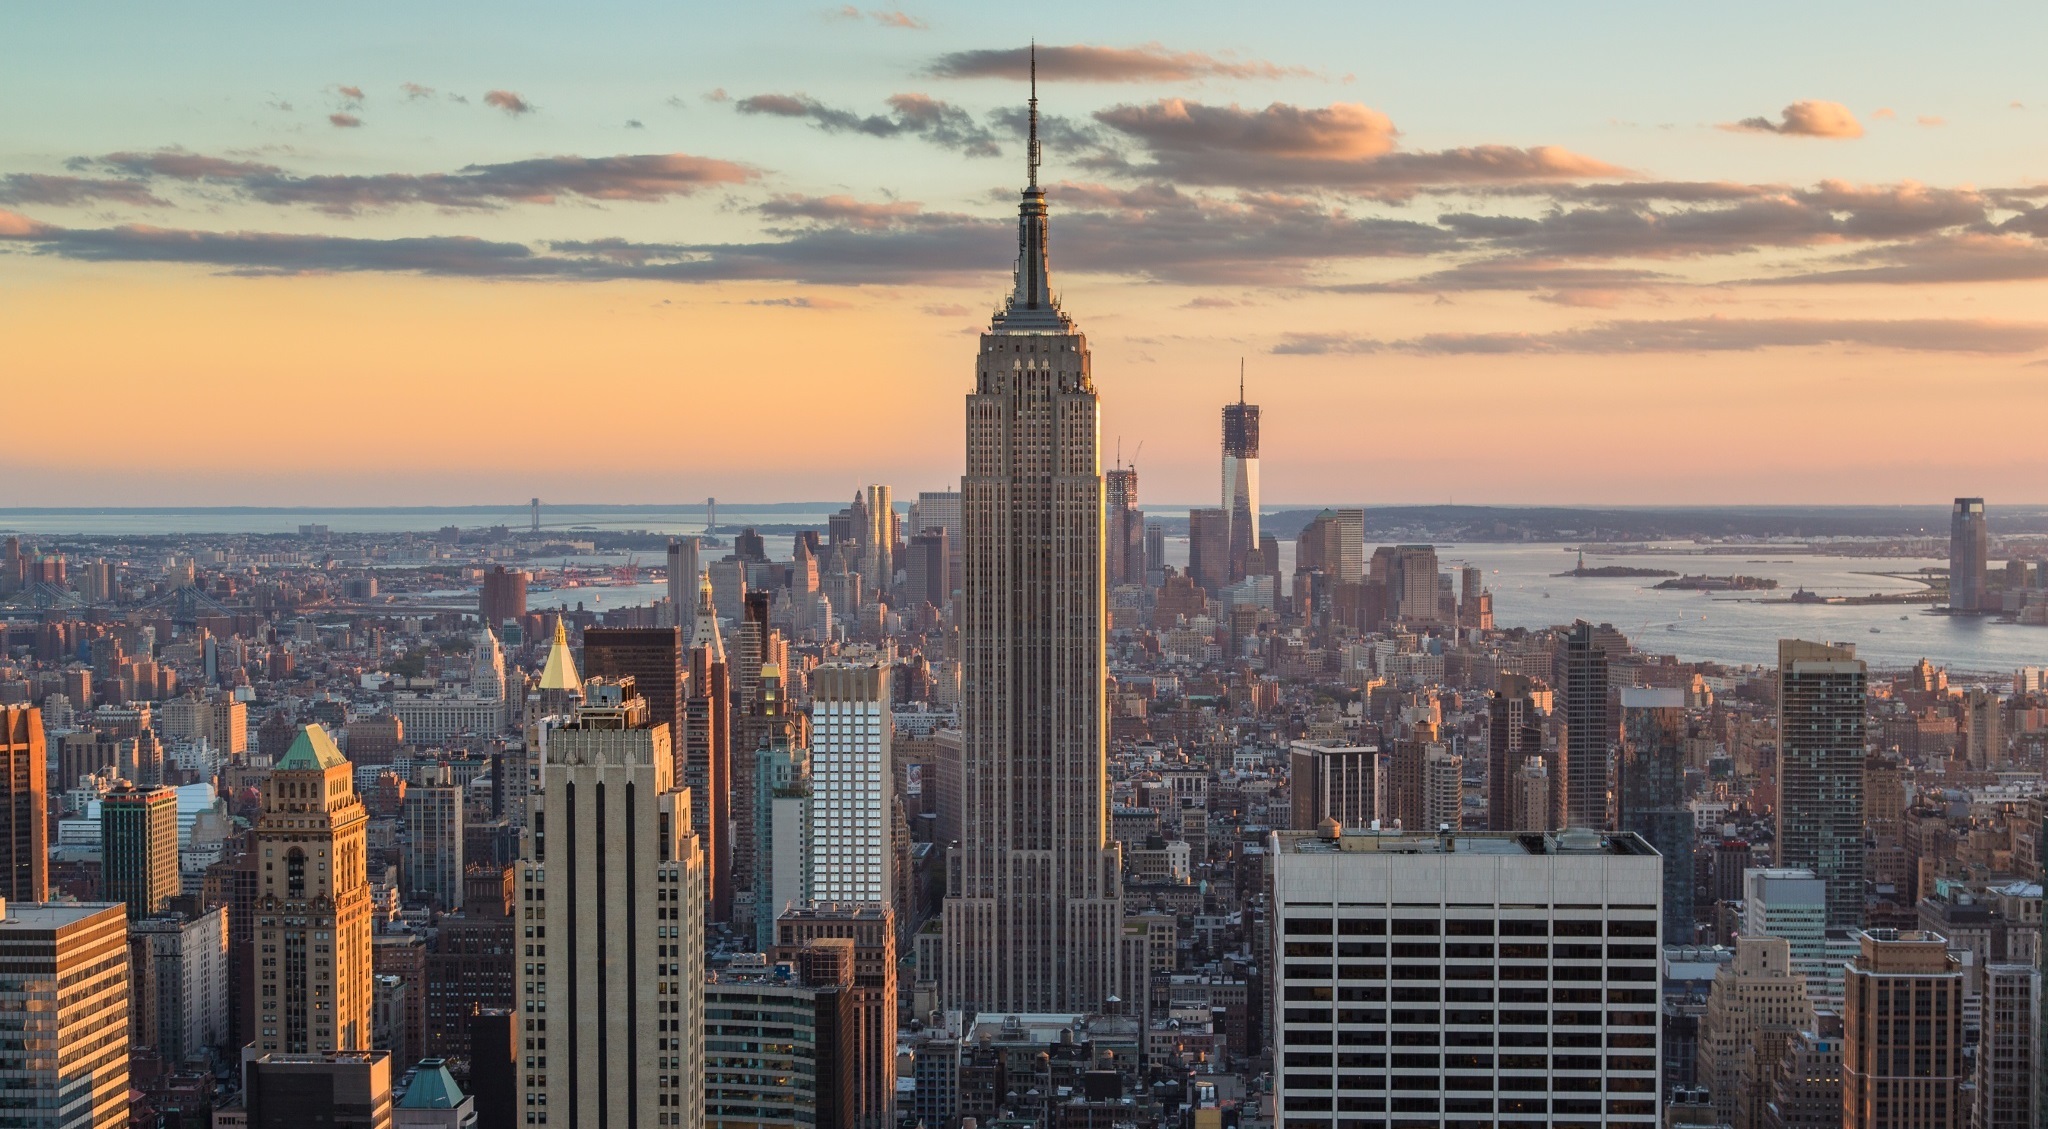 <p>The Empire State Building is arguably one of the most famous buildings in the world, and is a true icon in New York City.</p><p>It stands 102 stories tall (1, 250 feet) and can accommodate tens of thousands of people.</p><p><strong>Features:</strong> observation decks, tours, exhibits, shops, restaurants, theater</p><p>Sam valadi, Flickr</p>